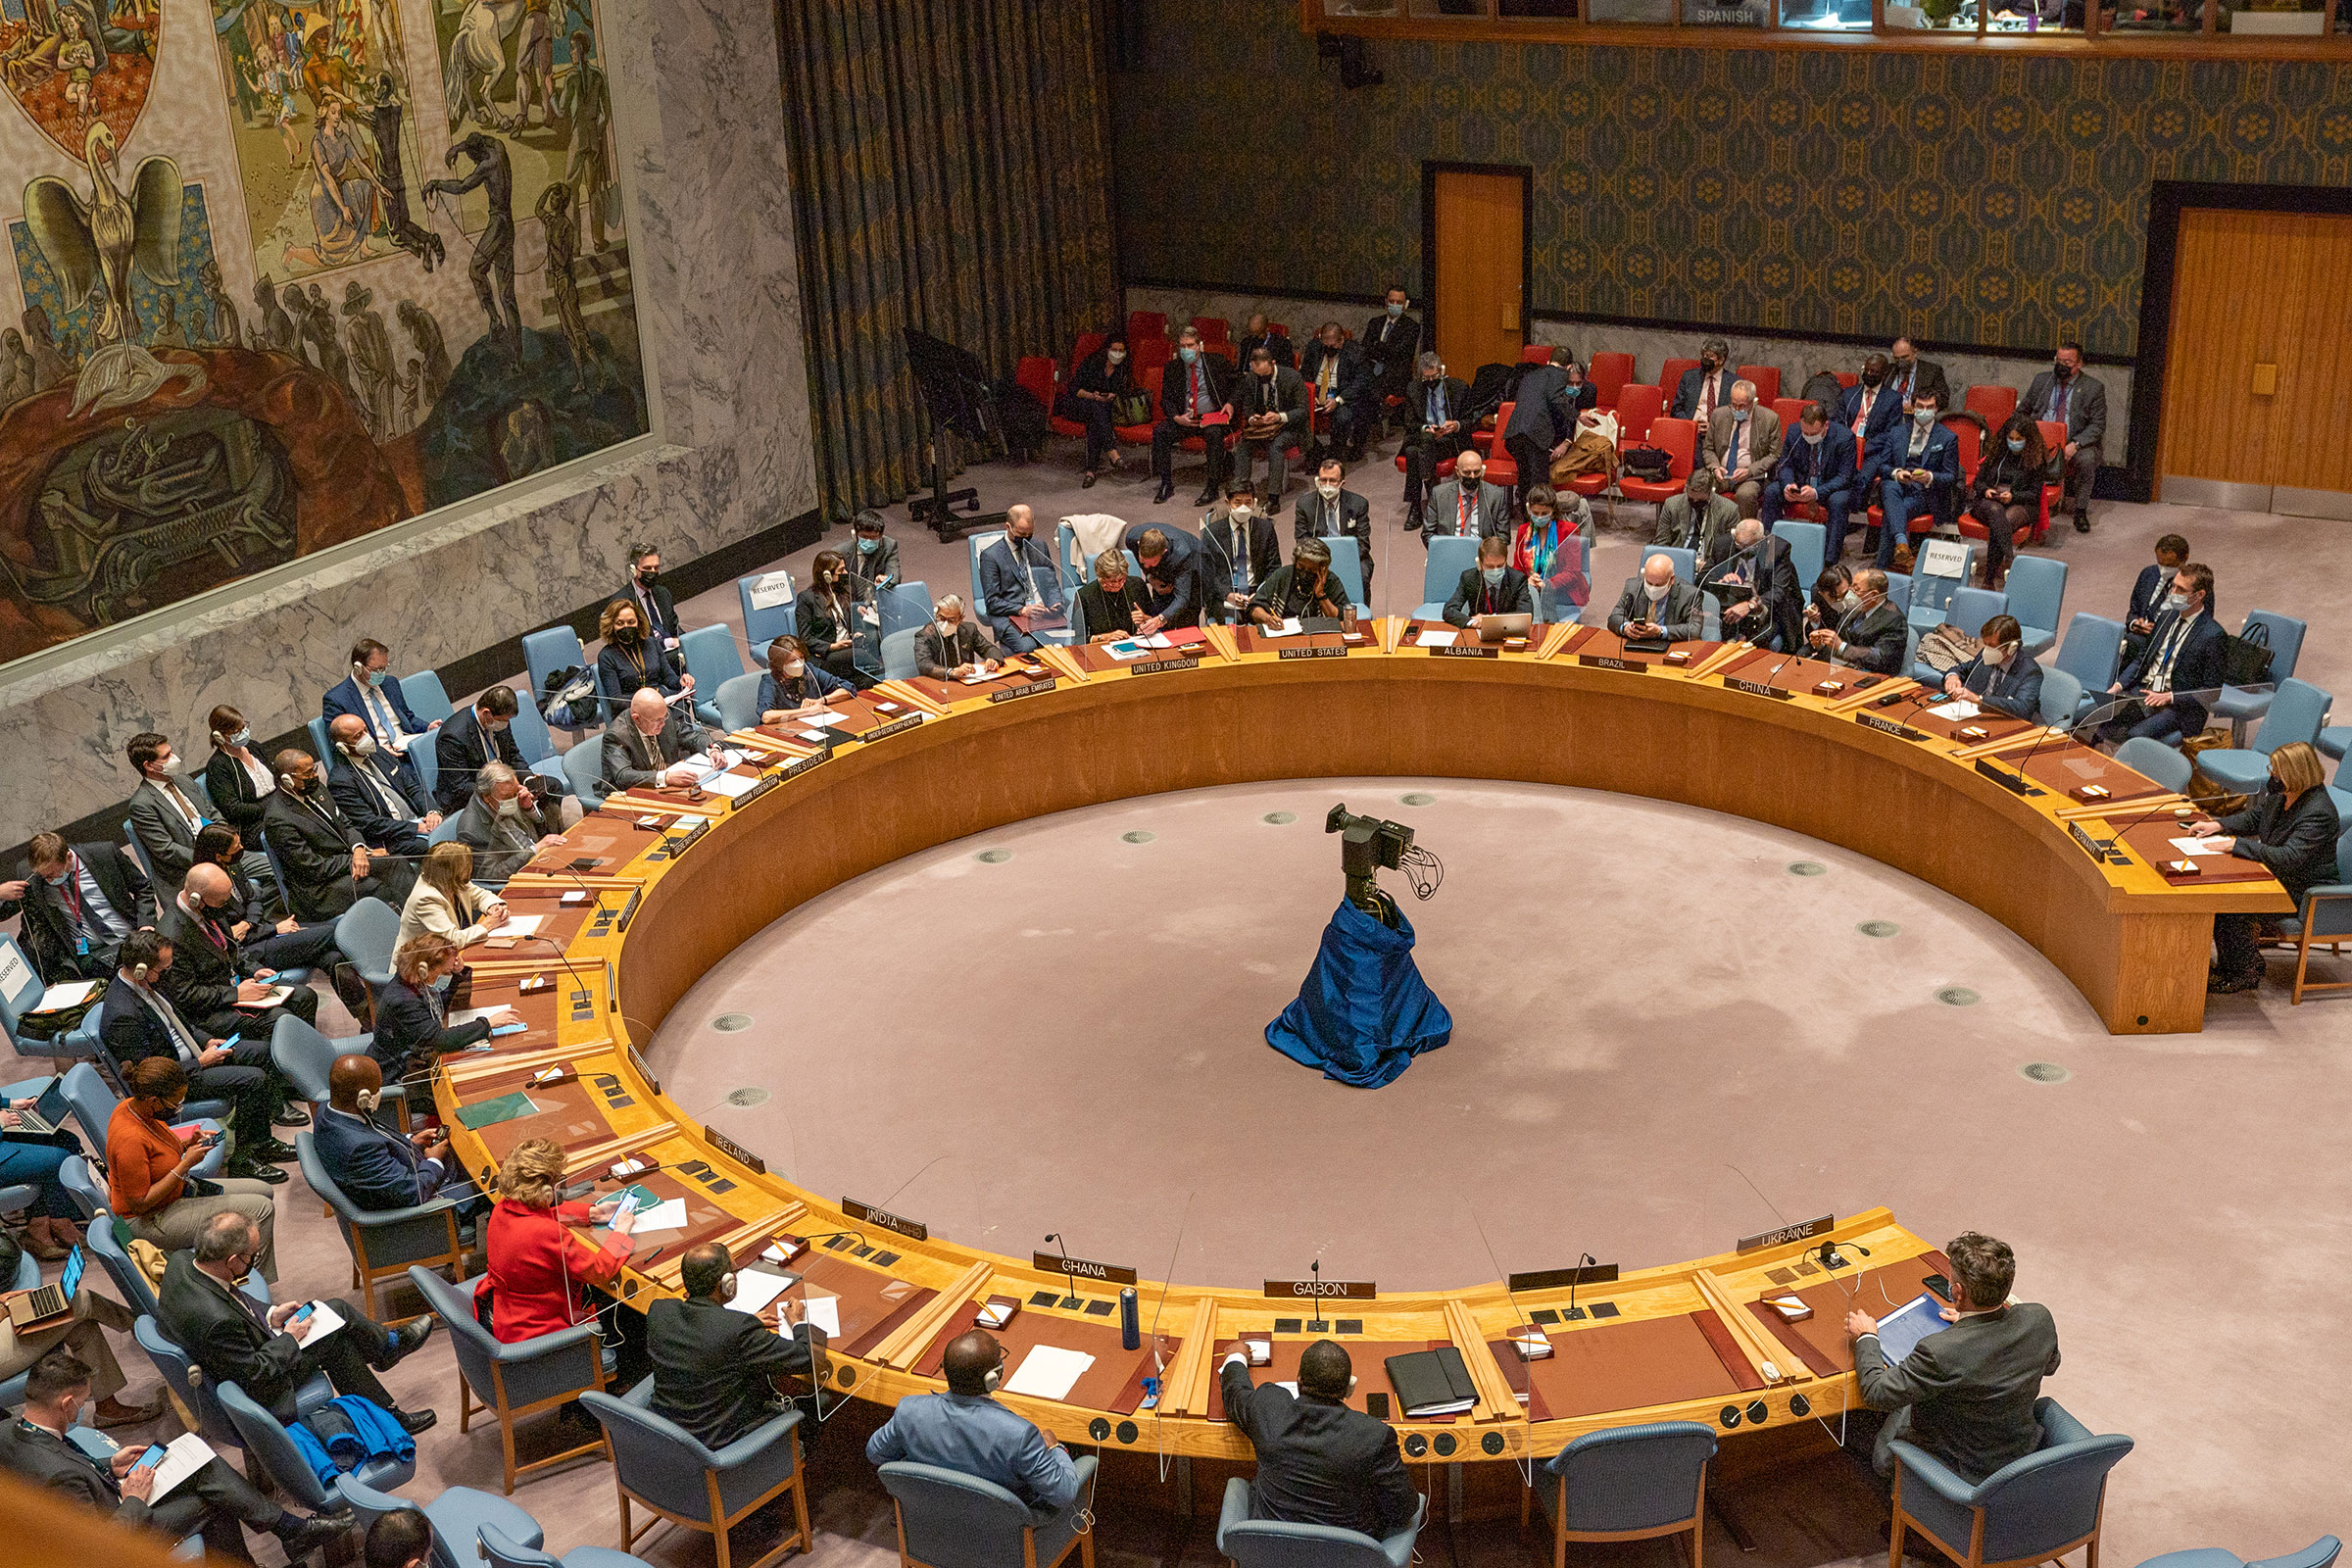 The United Nations security council gathers for an emergency meeting at the request of Ukraine over the threat of a full-scale invasion by Russia, in New York City on Feb. 23, 2022. (David Dee Delgado—Getty Images)